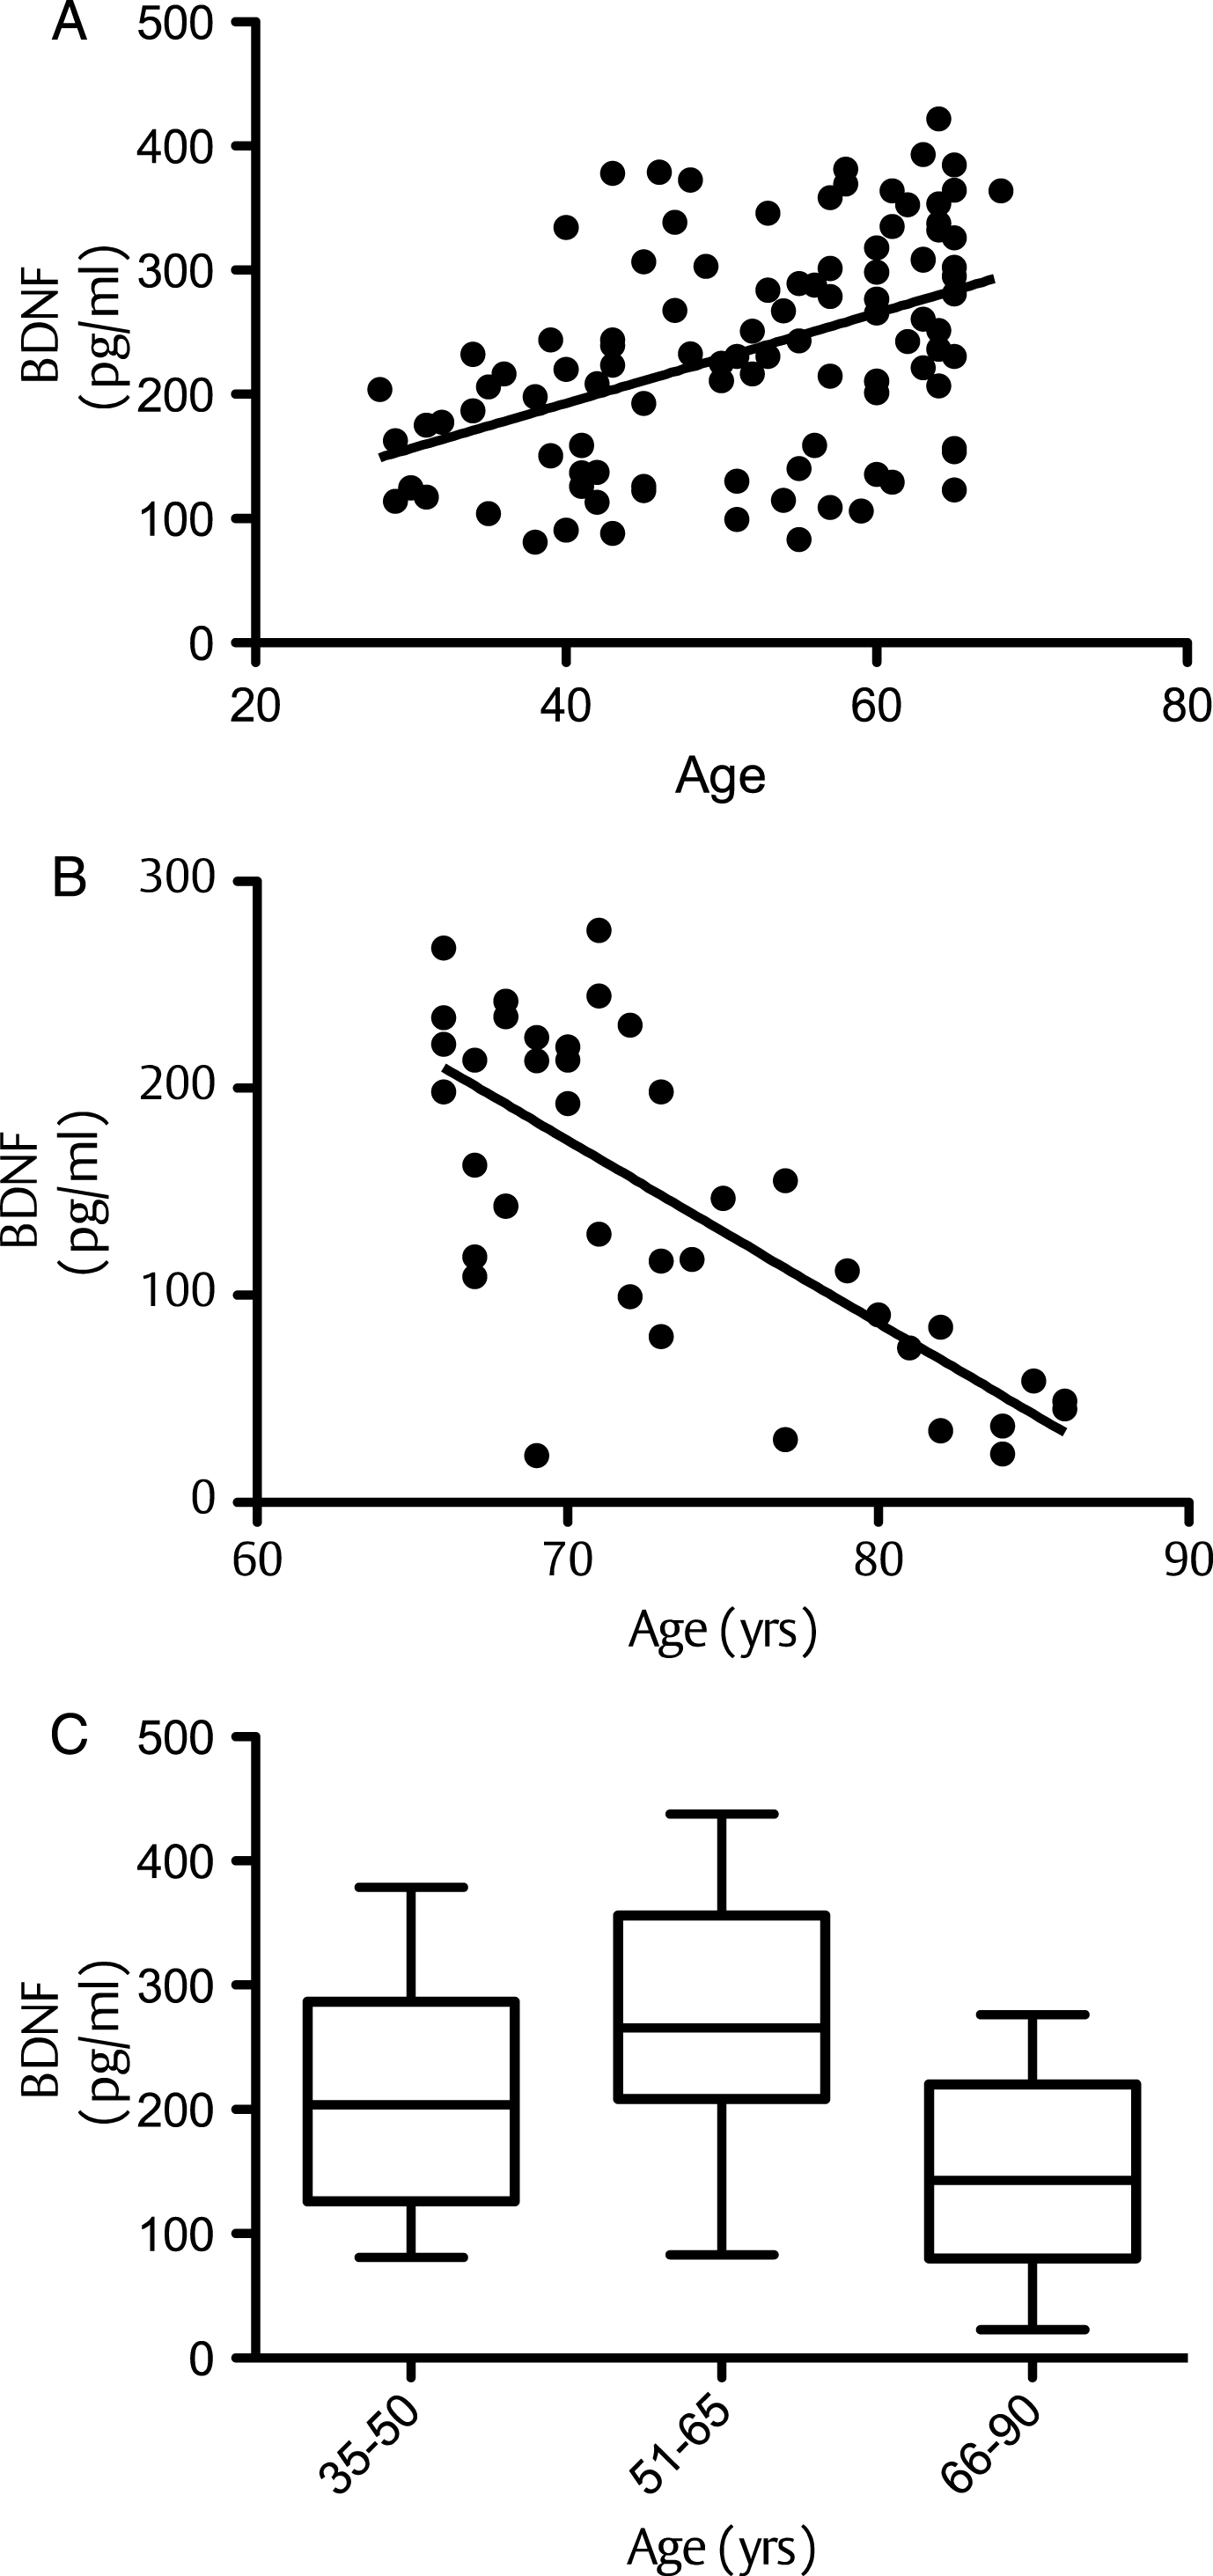 Correlation between serum BDNF and age: (A) correlation between BDNF and age for individuals up to 65 years; (B) BDNF and age ages 65–90 years; C: Whisker Plot showing tertiles of age against serum BDNF levels at baseline. A one-way analysis of variance indicated that the 3 means were significantly different from each other (P < 0.001). Post hoc analysis, using a Bonferroni multiple comparison test, indicated that the 51–65 group had significantly higher serum BDNF levels compared to the 35–50 age group (a: p < 0.01), whilst the 66–90 group had significantly lower BDNF levels than the 35–50 group (b: p < 0.05) and the 51–65 group (c: p < 0.001). Horizontal lines within bars indicates mean level and bars indicates 25–75% distribution; Error lines indicate the min and max serum BDNF levels measured.